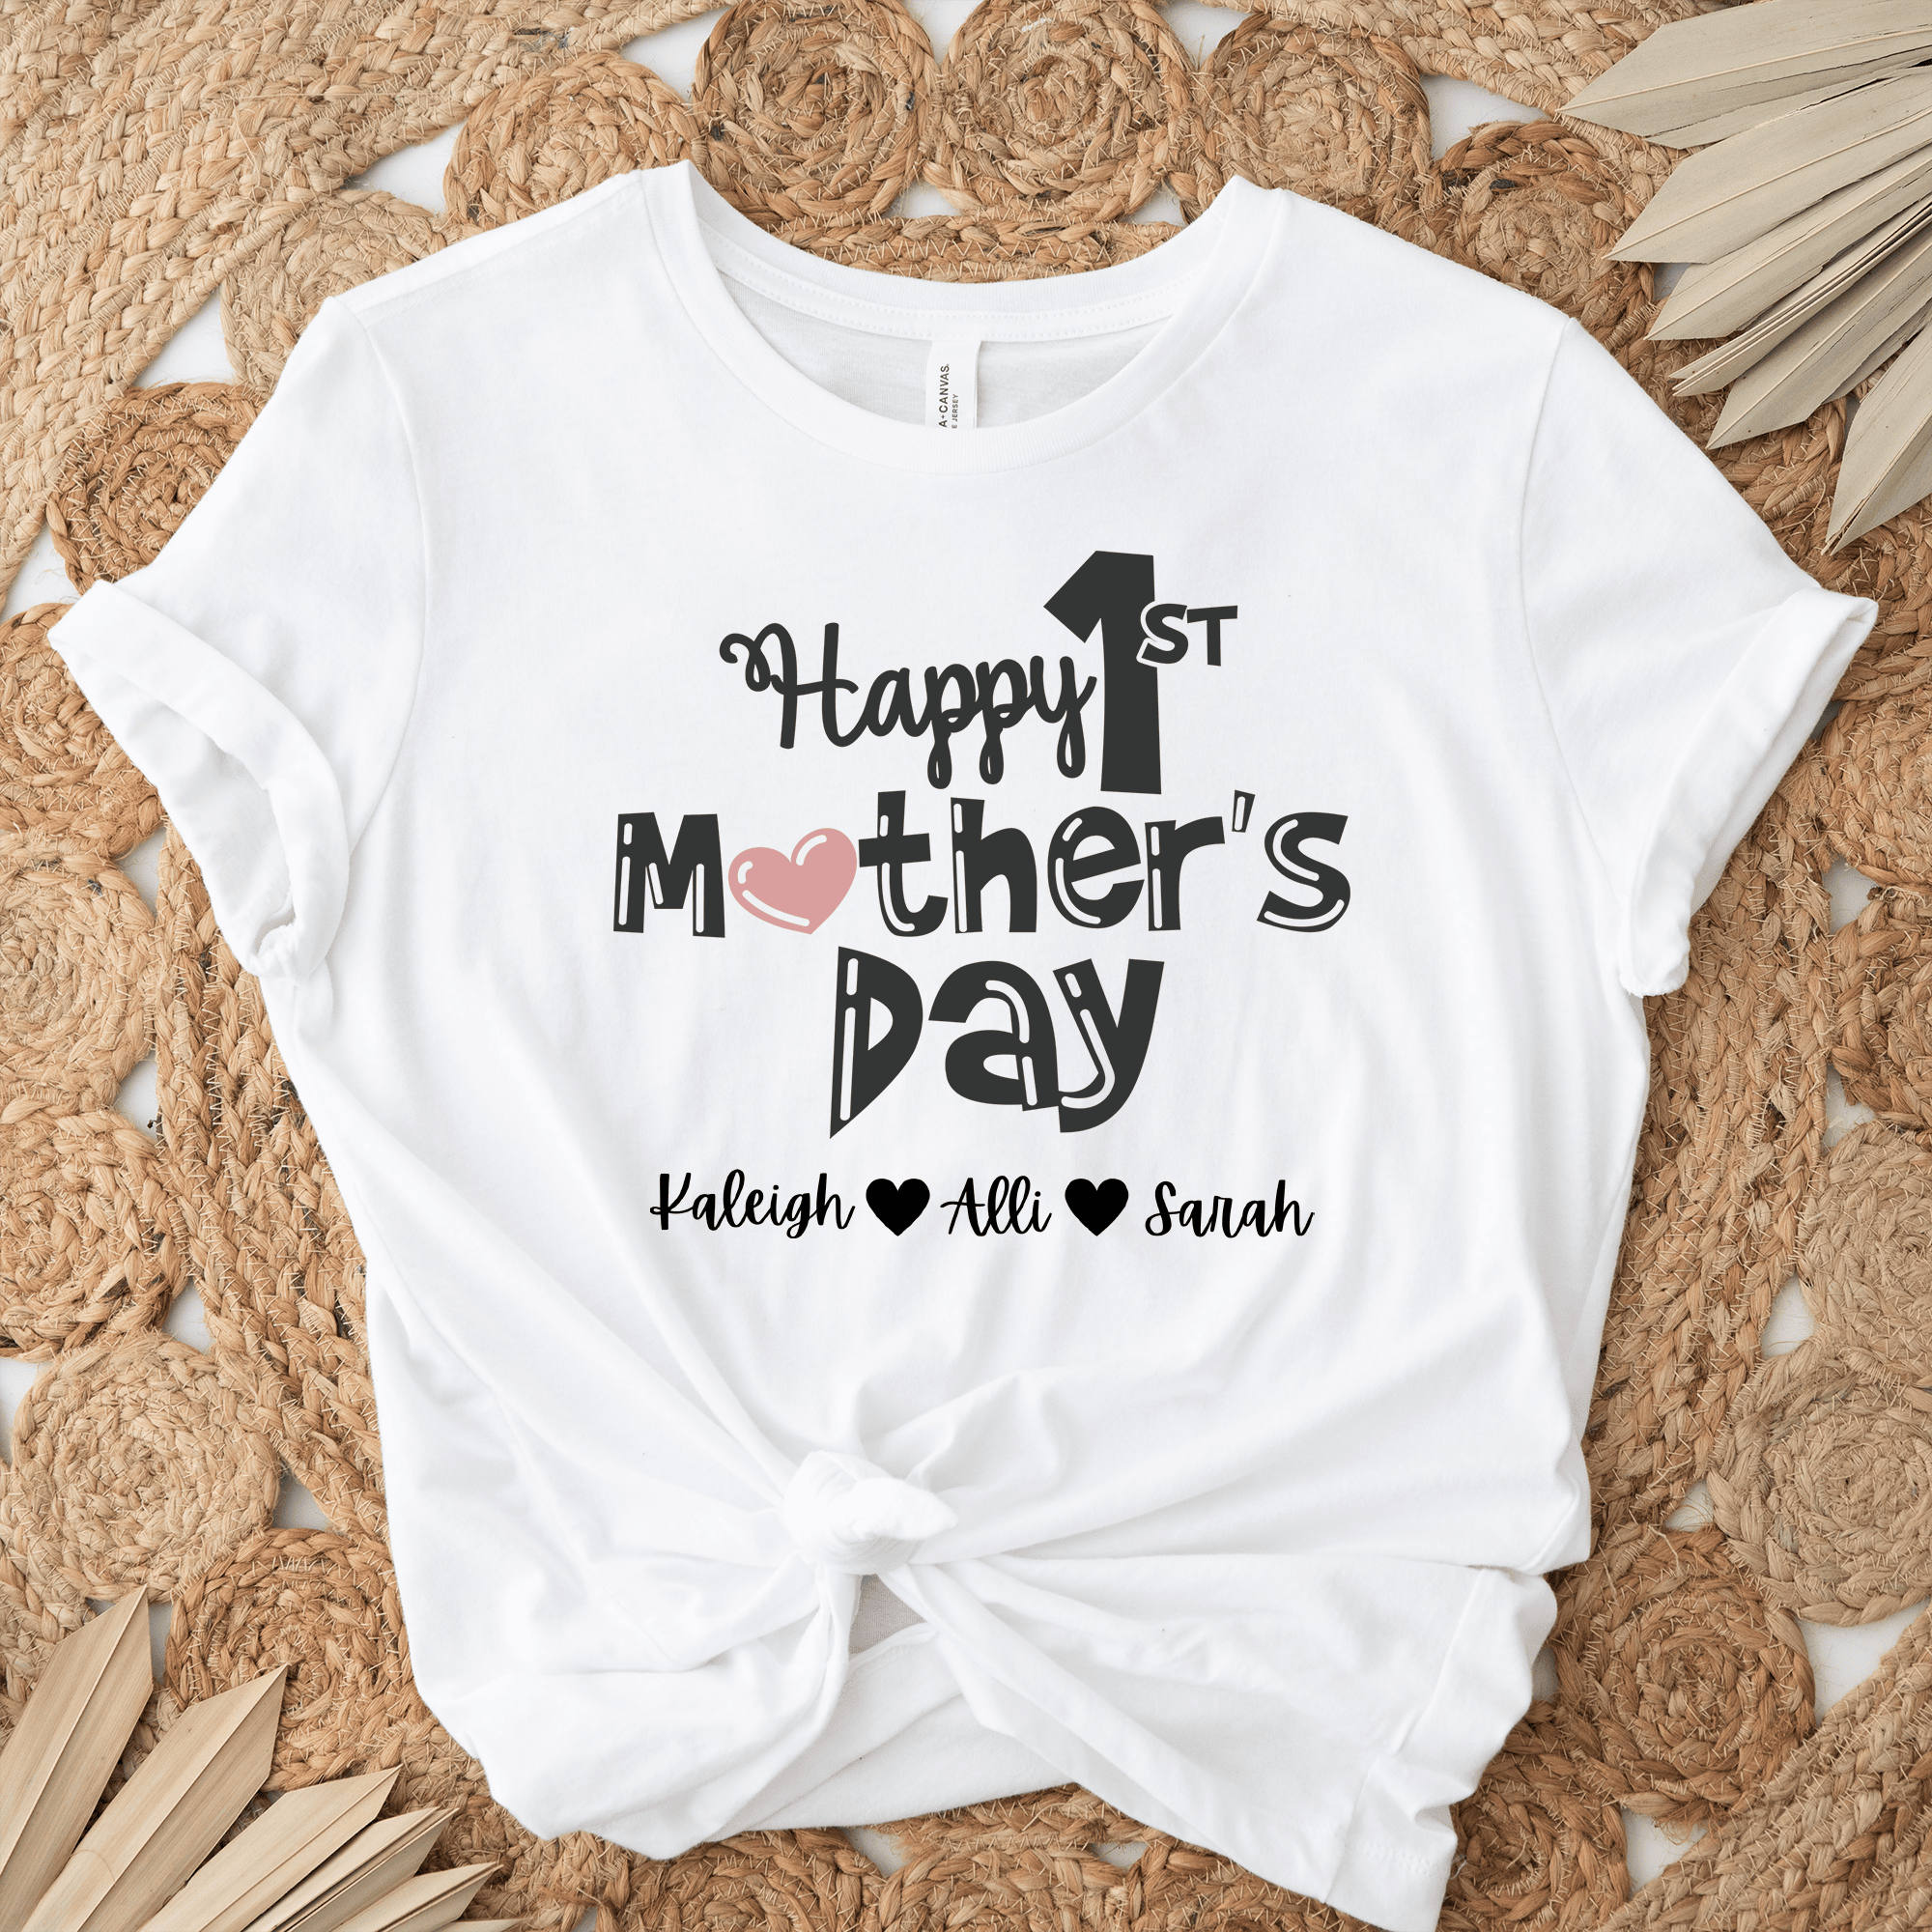 Womens White T Shirt with First-Mothers-Day design